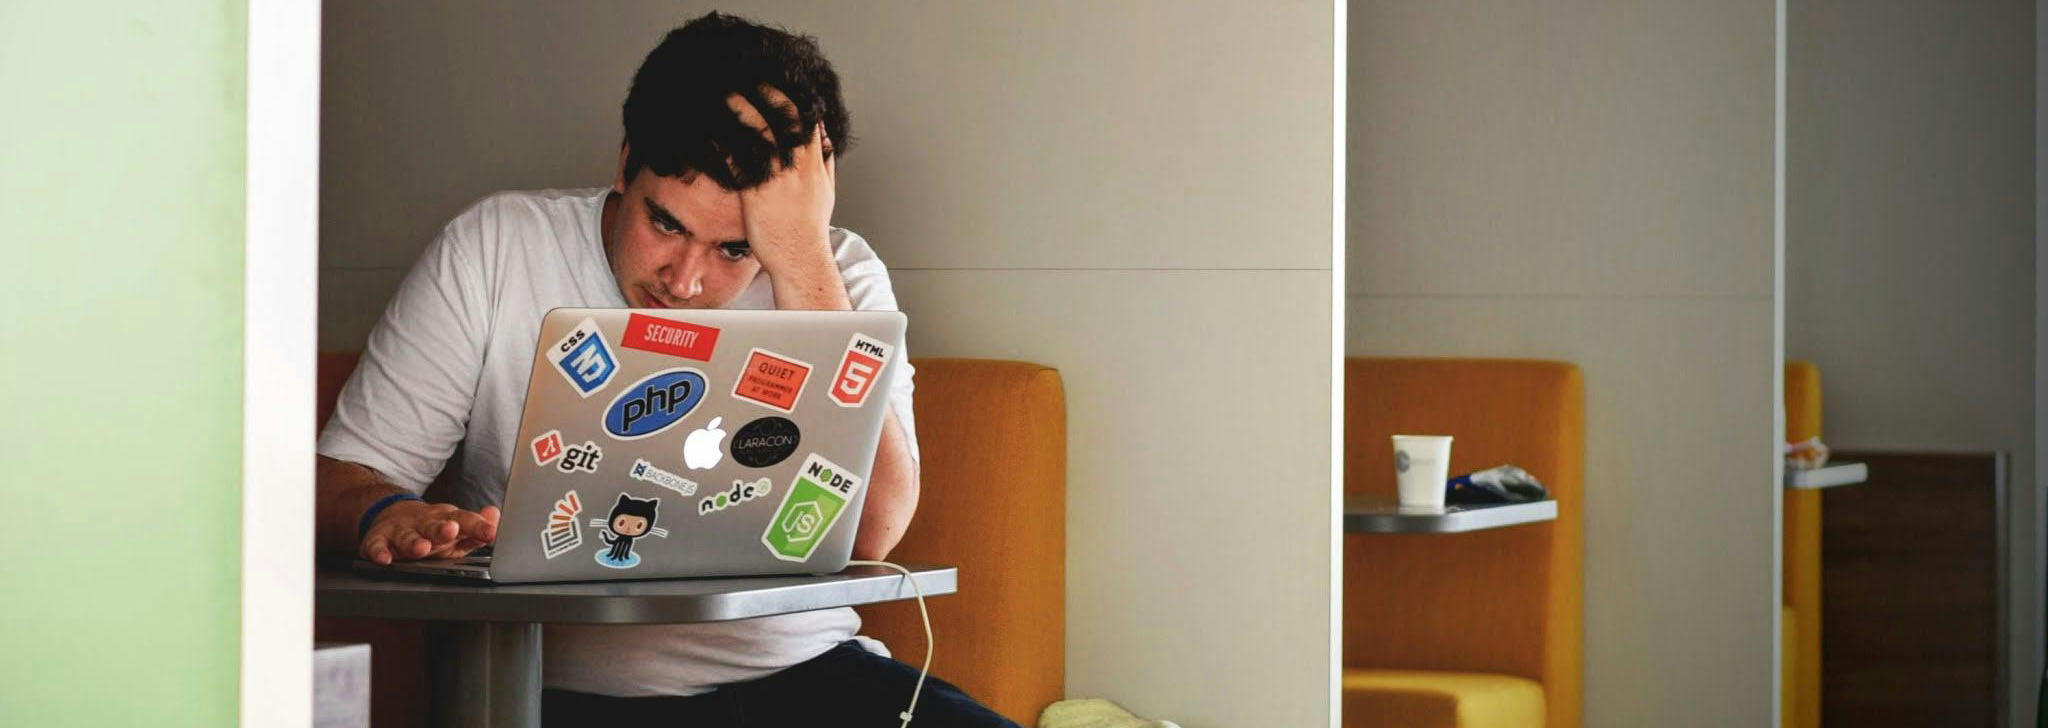 Tom doesn’t understand where this IDE0100 error is coming from, but is he really a .NET dev? This PHP sticker is suspicious! (photo by Tim Gouw on pexels.com)